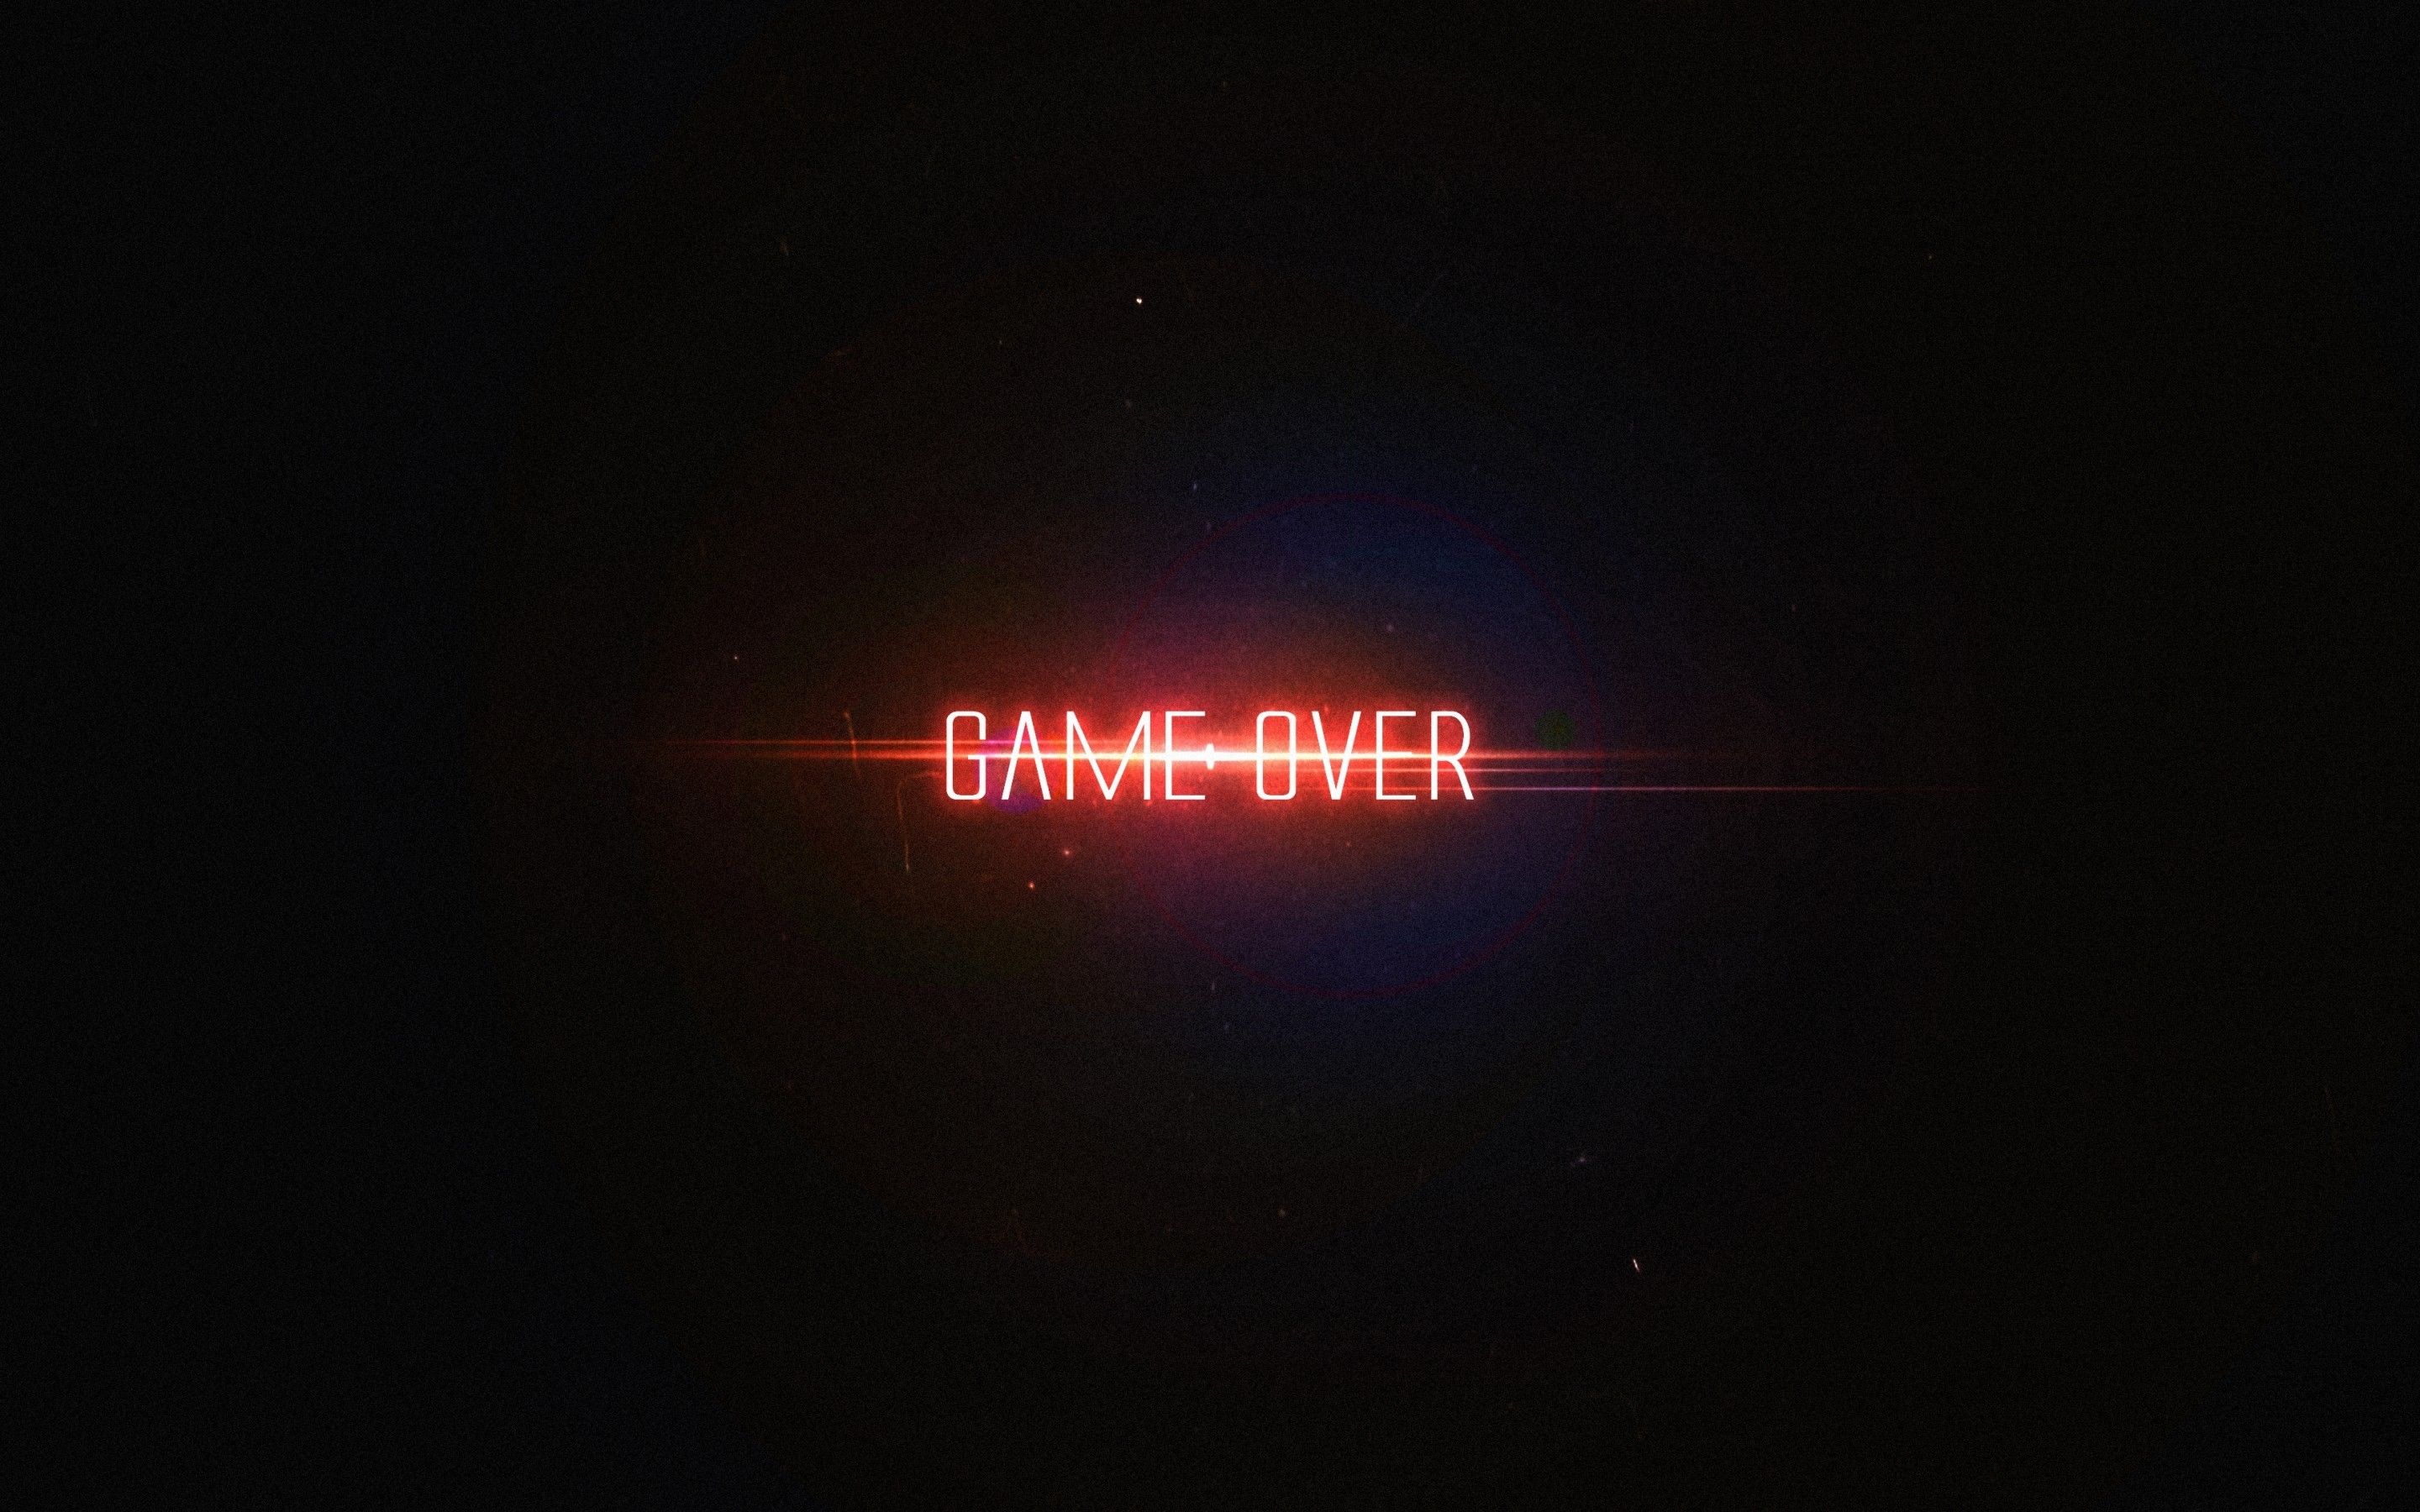 Download 2880x1800 Game Over, Neon Style, End Game Text Wallpaper for MacBook Pro 15 inch